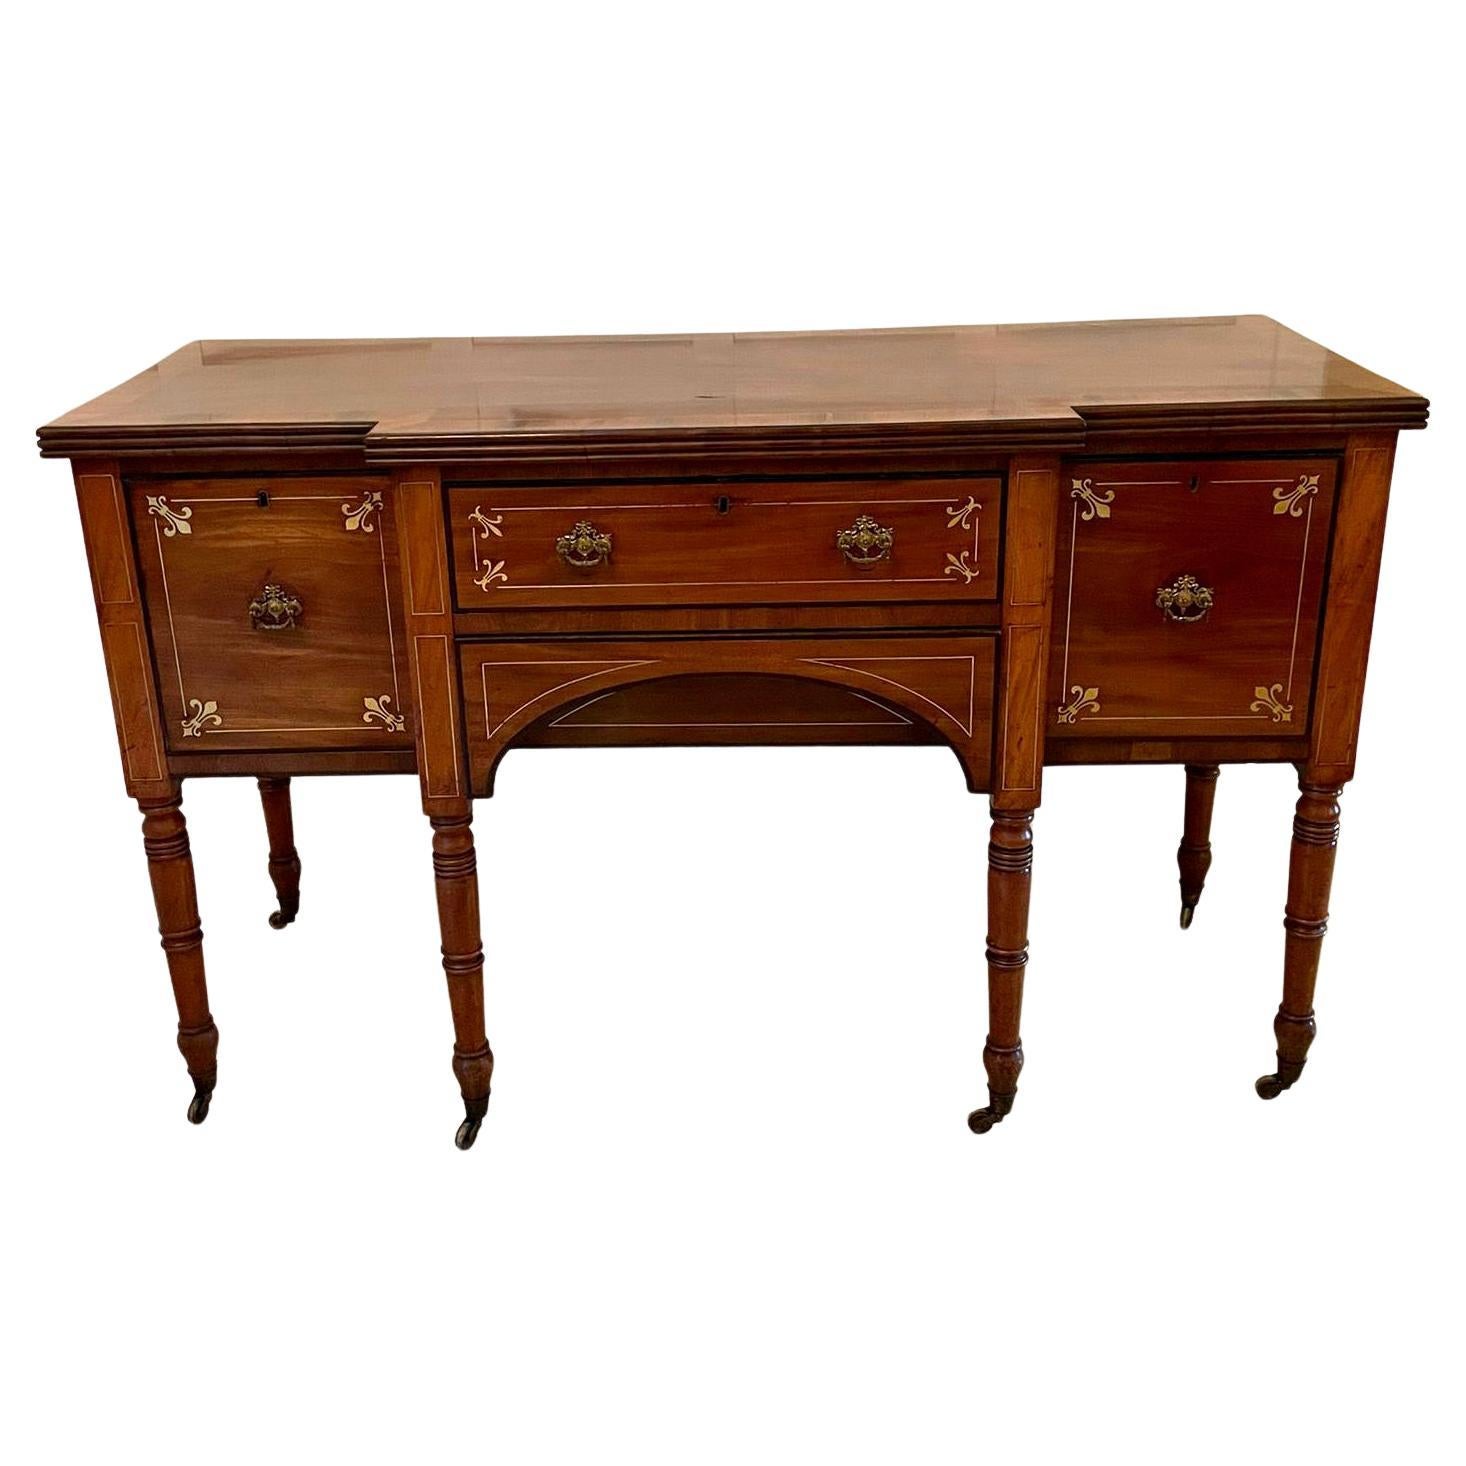 Fine Quality Antique Regency Brass Inlaid Mahogany Breakfront Sideboard For Sale